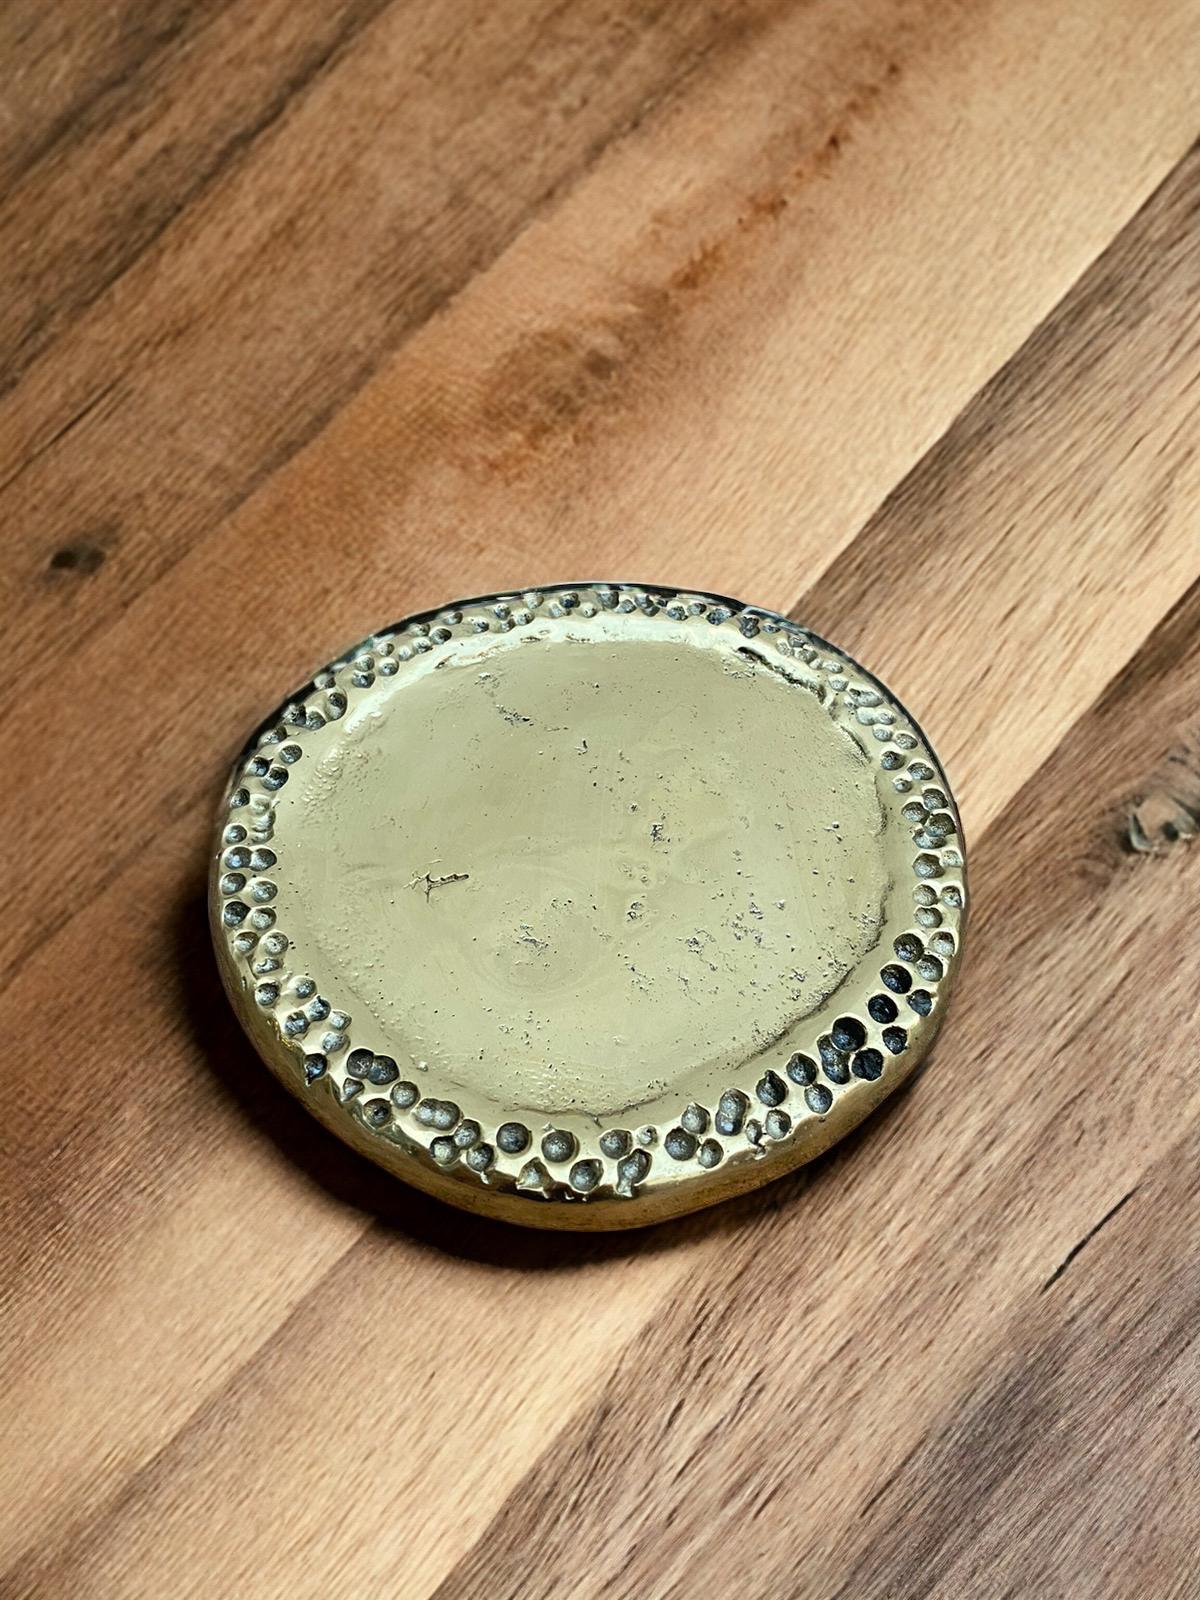 The decorative Ethnic Coaster was created by David Marshall, it is made of sand cast brass. Makes a beautiful Wedding or Company Gift.
Handmade, mounted and finished in our foundry and workshop in Spain from recycled materials.
Certified authentic